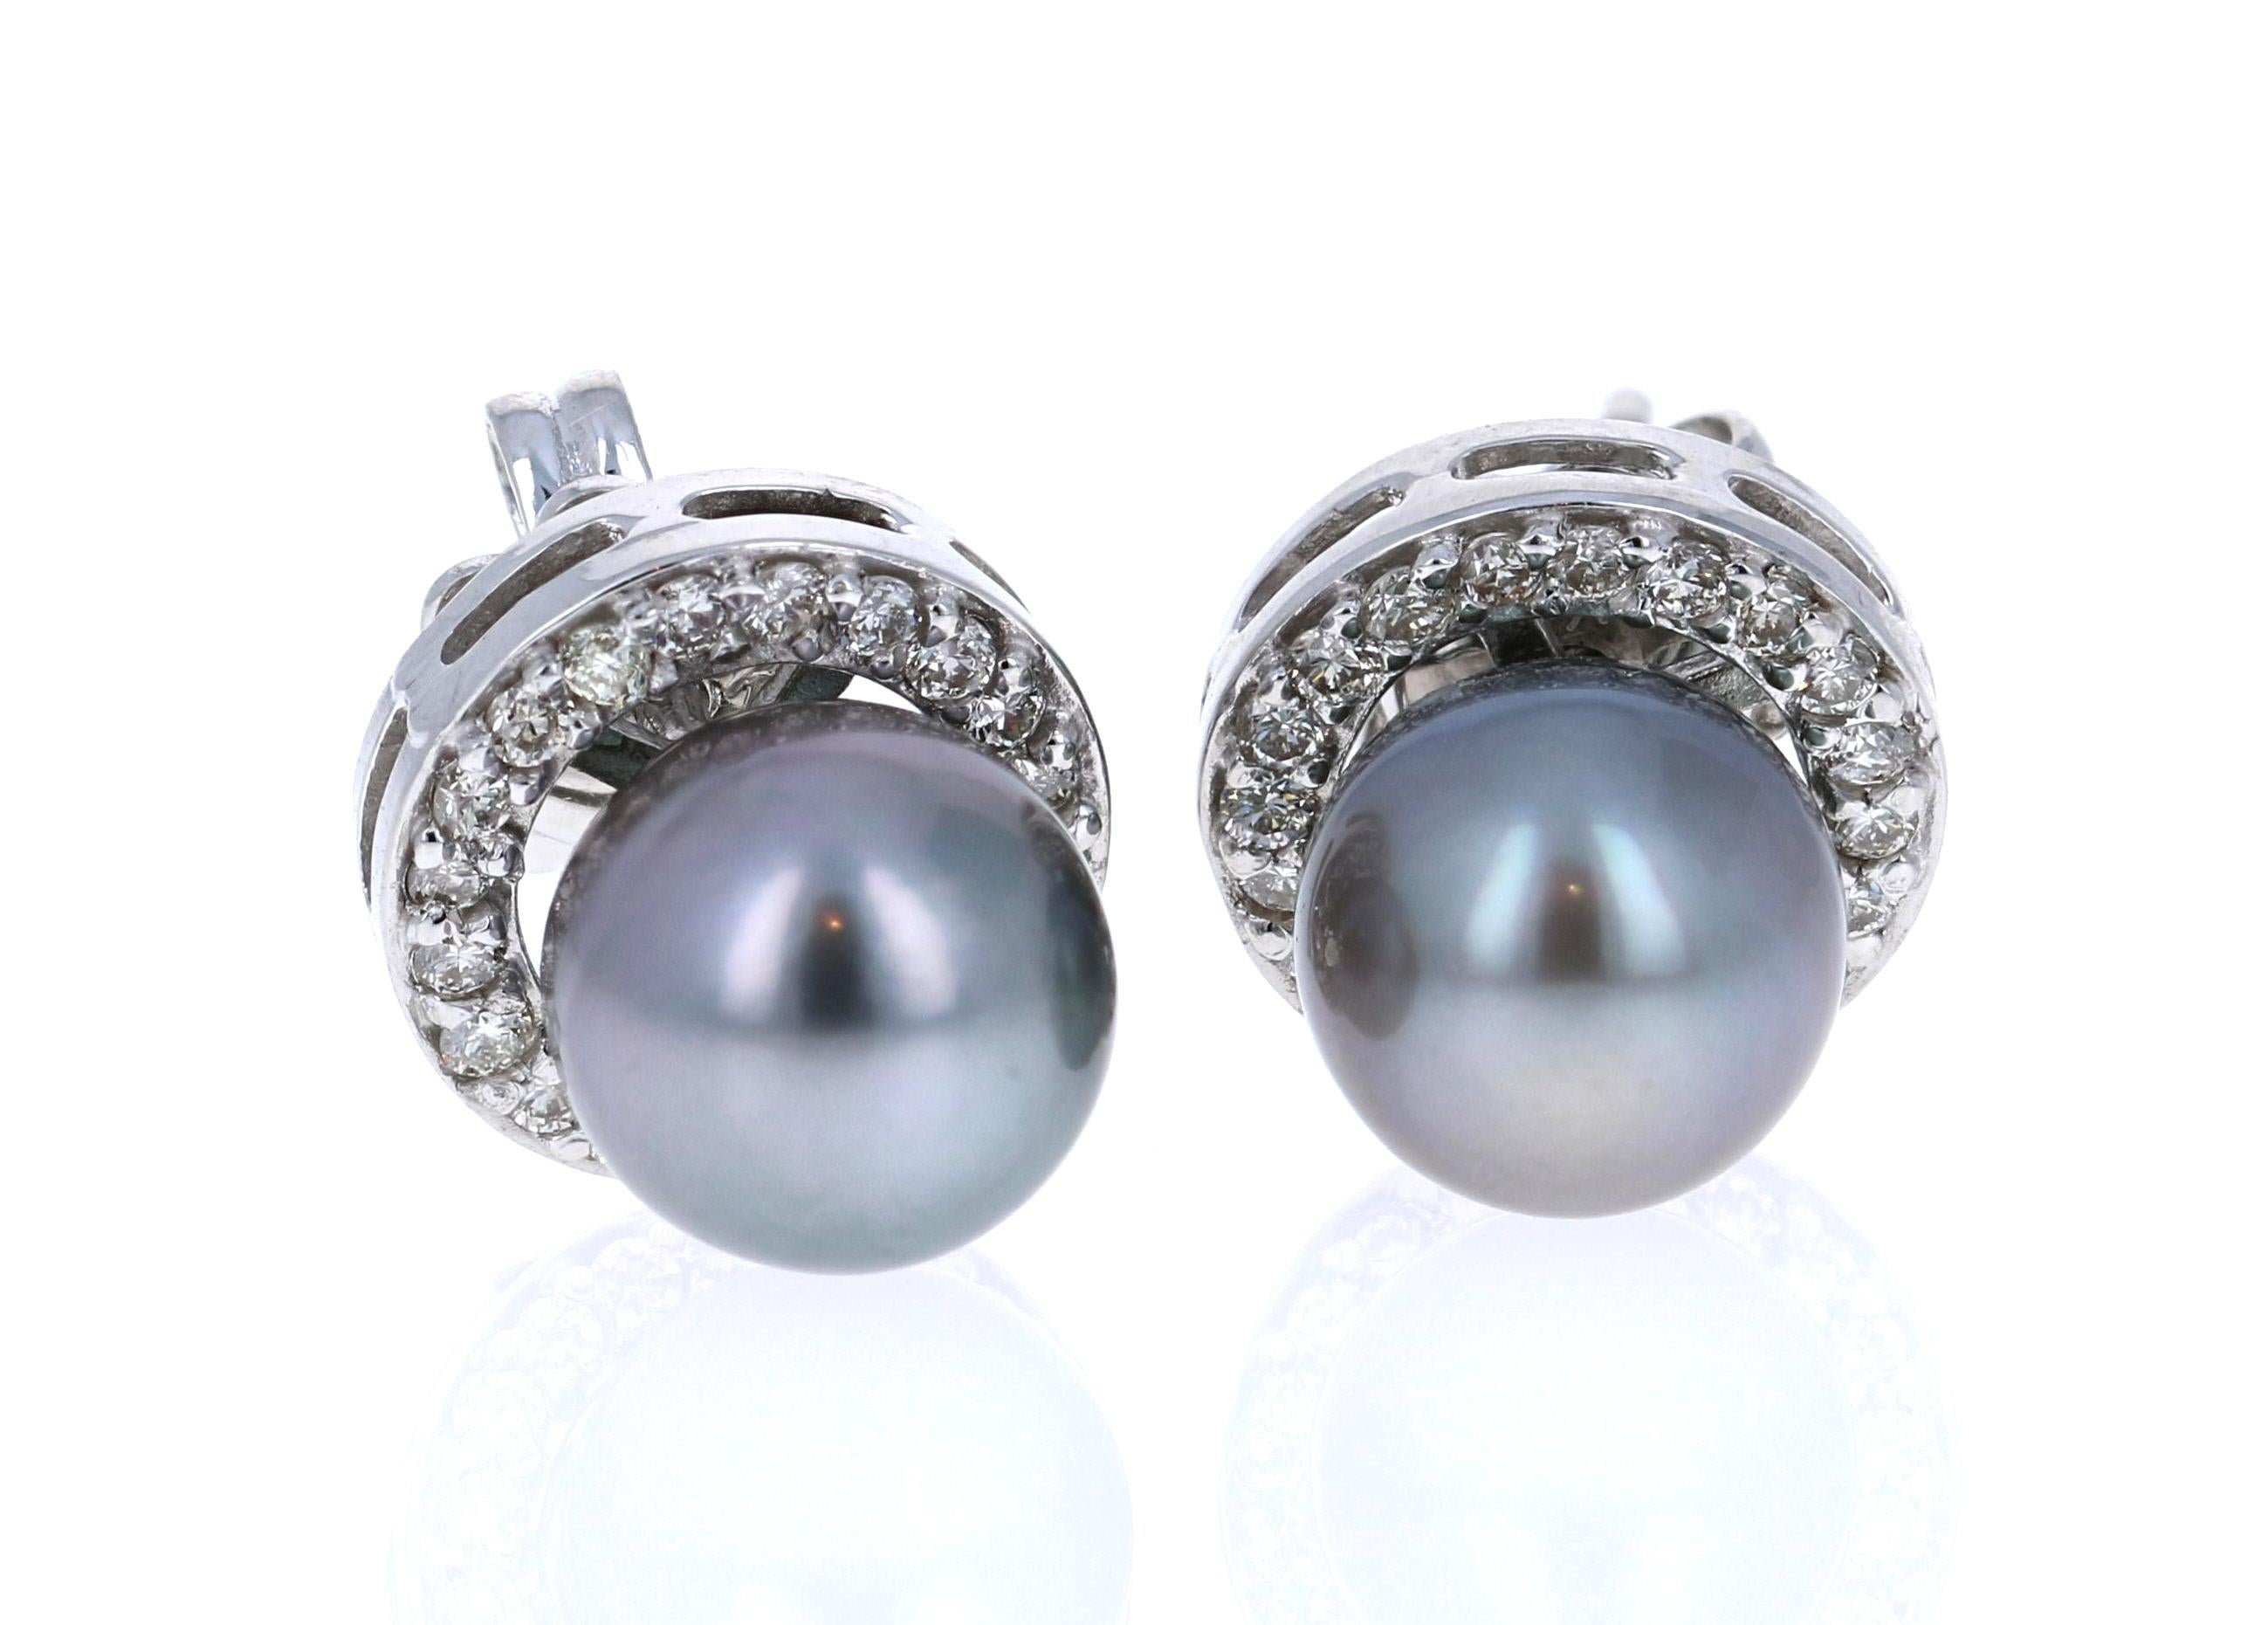 Natural Tahitian Pearl Earrings that have 8 mm pearls and are surrounded by 40 Round Cut Diamonds that weigh 0.44 carats. 
The earrings are set in 14K White Gold and weigh approximately 2.8 grams. 

